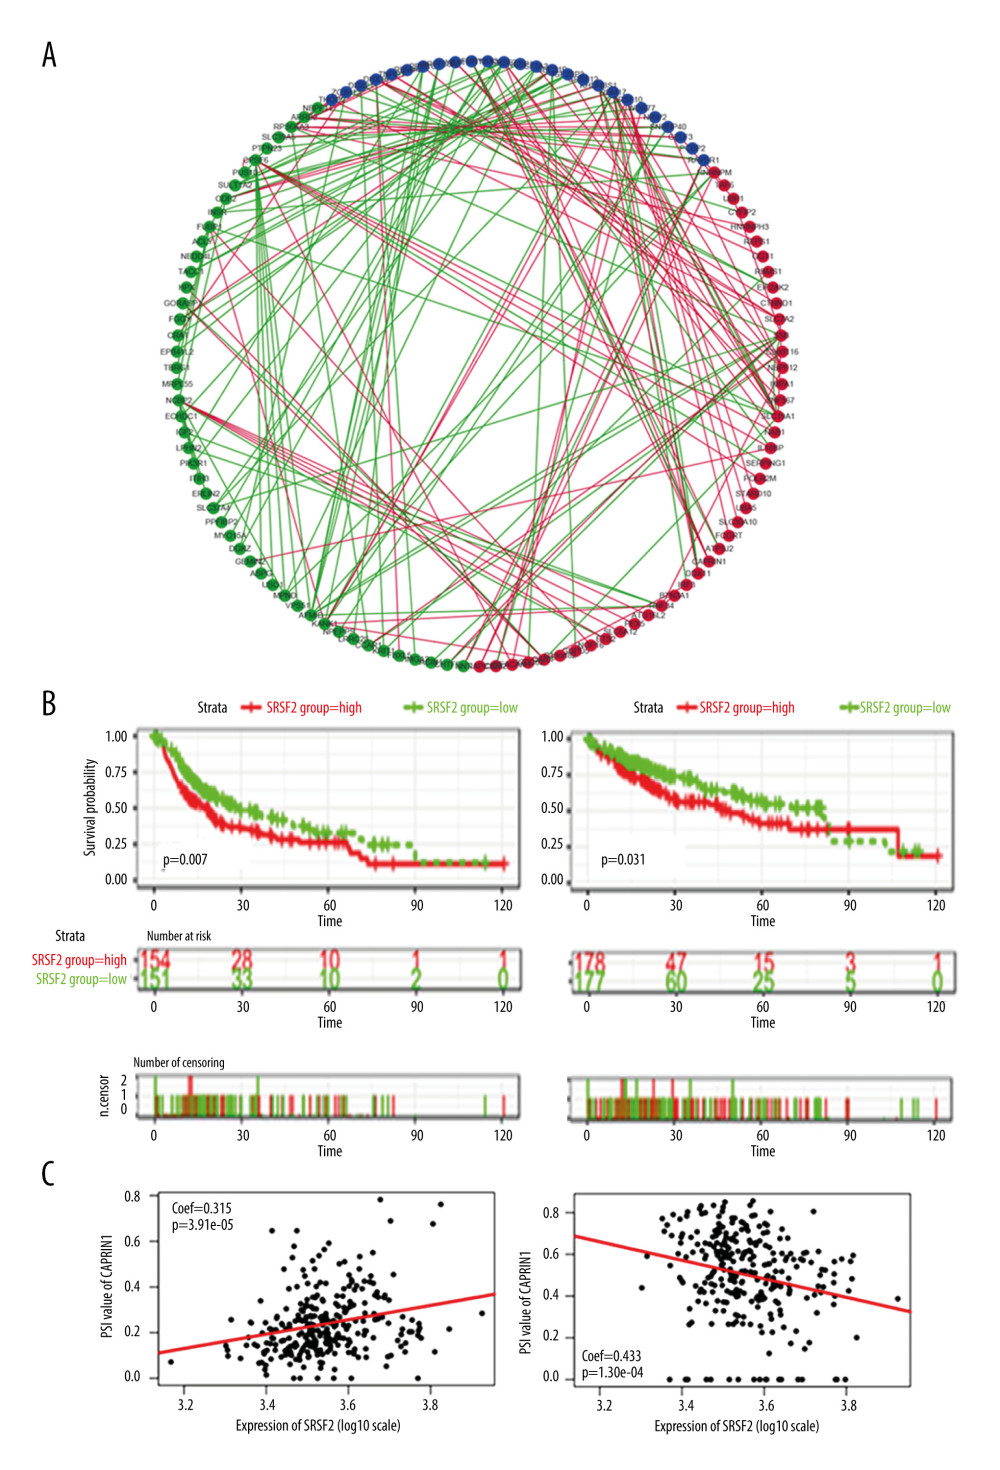 Survival-associated SFs and splicing correlation network in HCC patients. (A) Splicing correlation network. AS events with PSI values negatively/positively associated with survival are shown in red/green dots, respectively. SFs related to survival are presented as purple dots. Green/red lines represent negative/positive between SFs expression and PSI values of AS, respectively. (B) High expression (red line) of splicing factor SRSF2 is strongly related to poor disease-free survival (left panel) and poor overall survival (right panel). (C) Dot plot of correlation between expression of SRSF2 and AP PSI values of CAPRIN1 (left panel), and the correlation between ES PSI values of SULT1A2 and expression of SRSF2 (right panel).